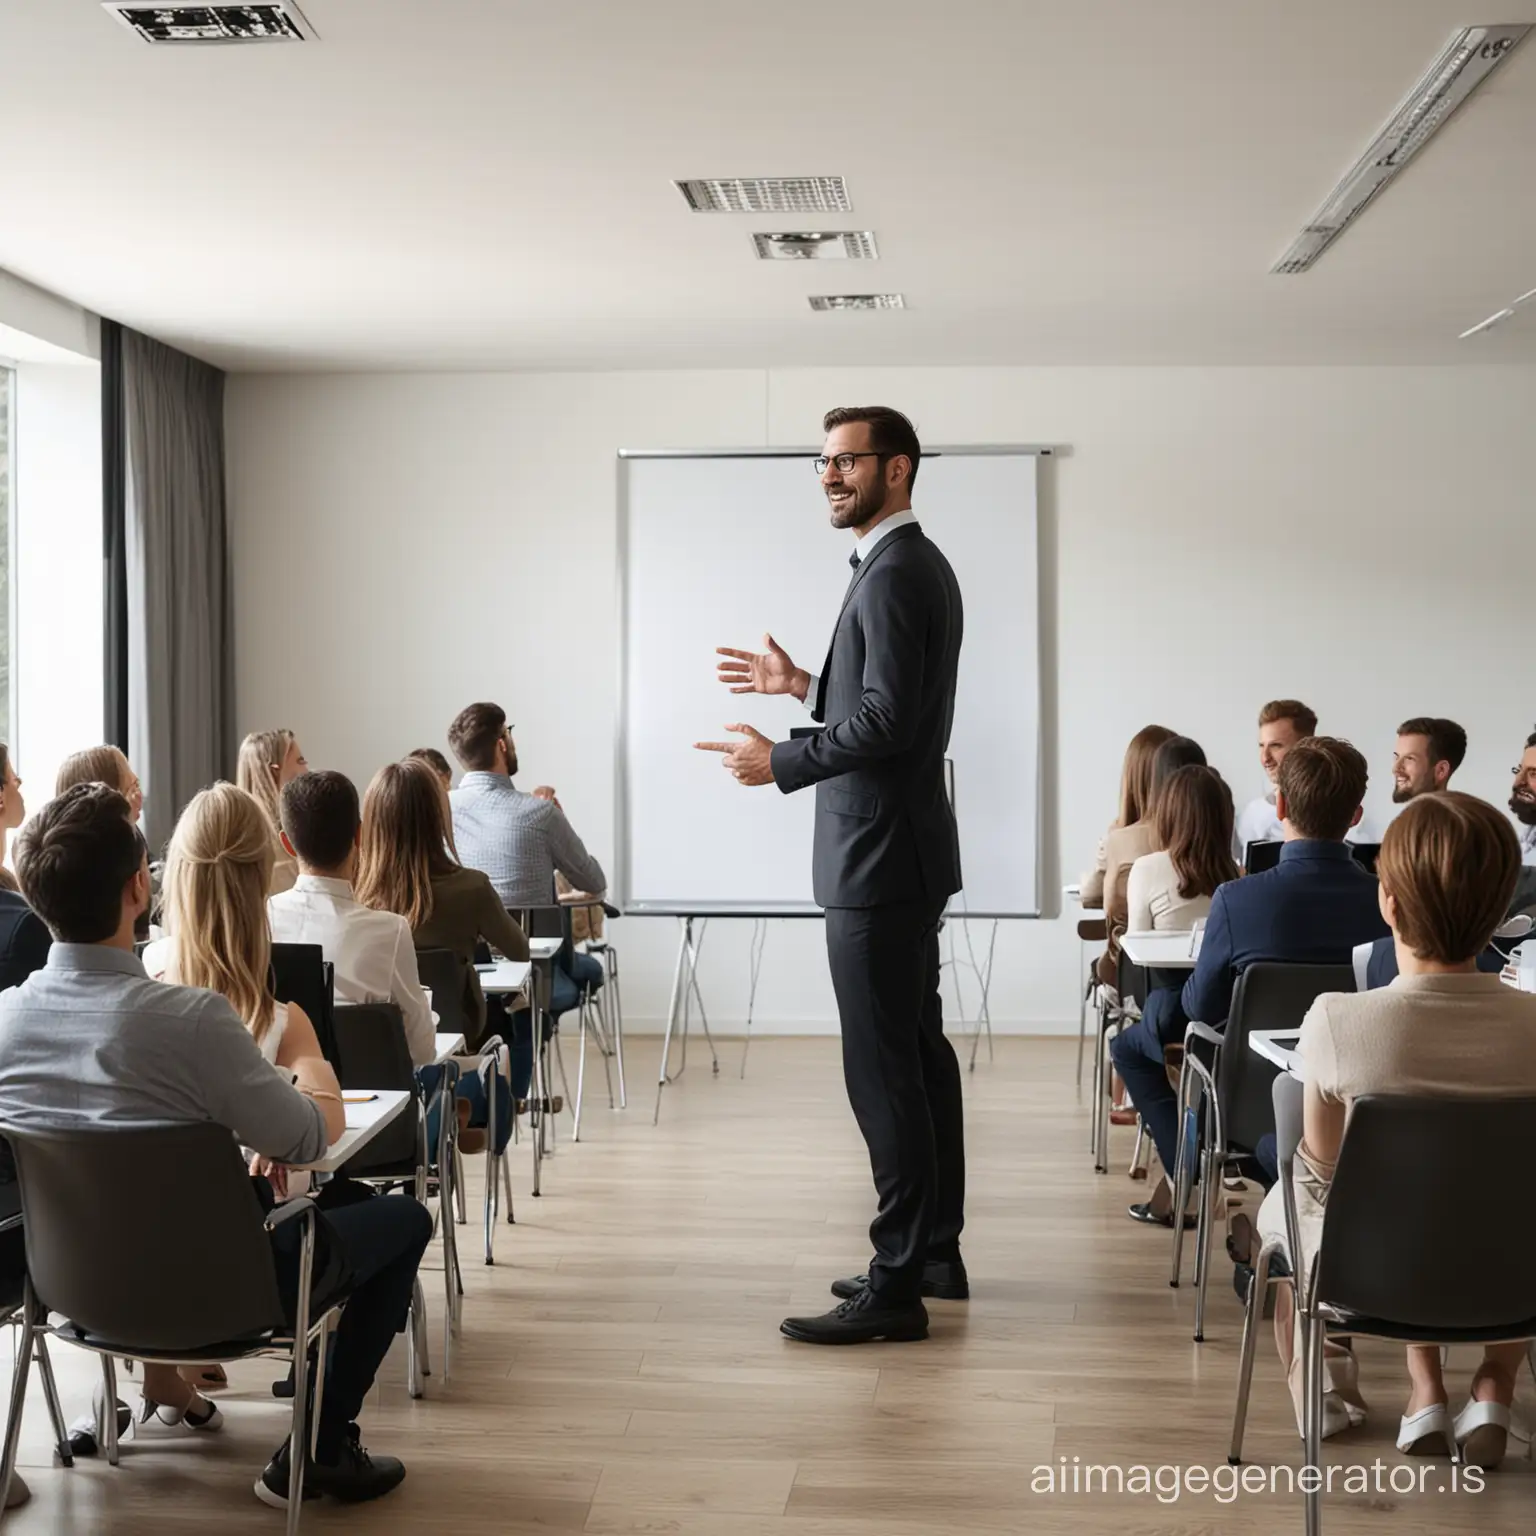 man giving presentation to many people in a meeting room